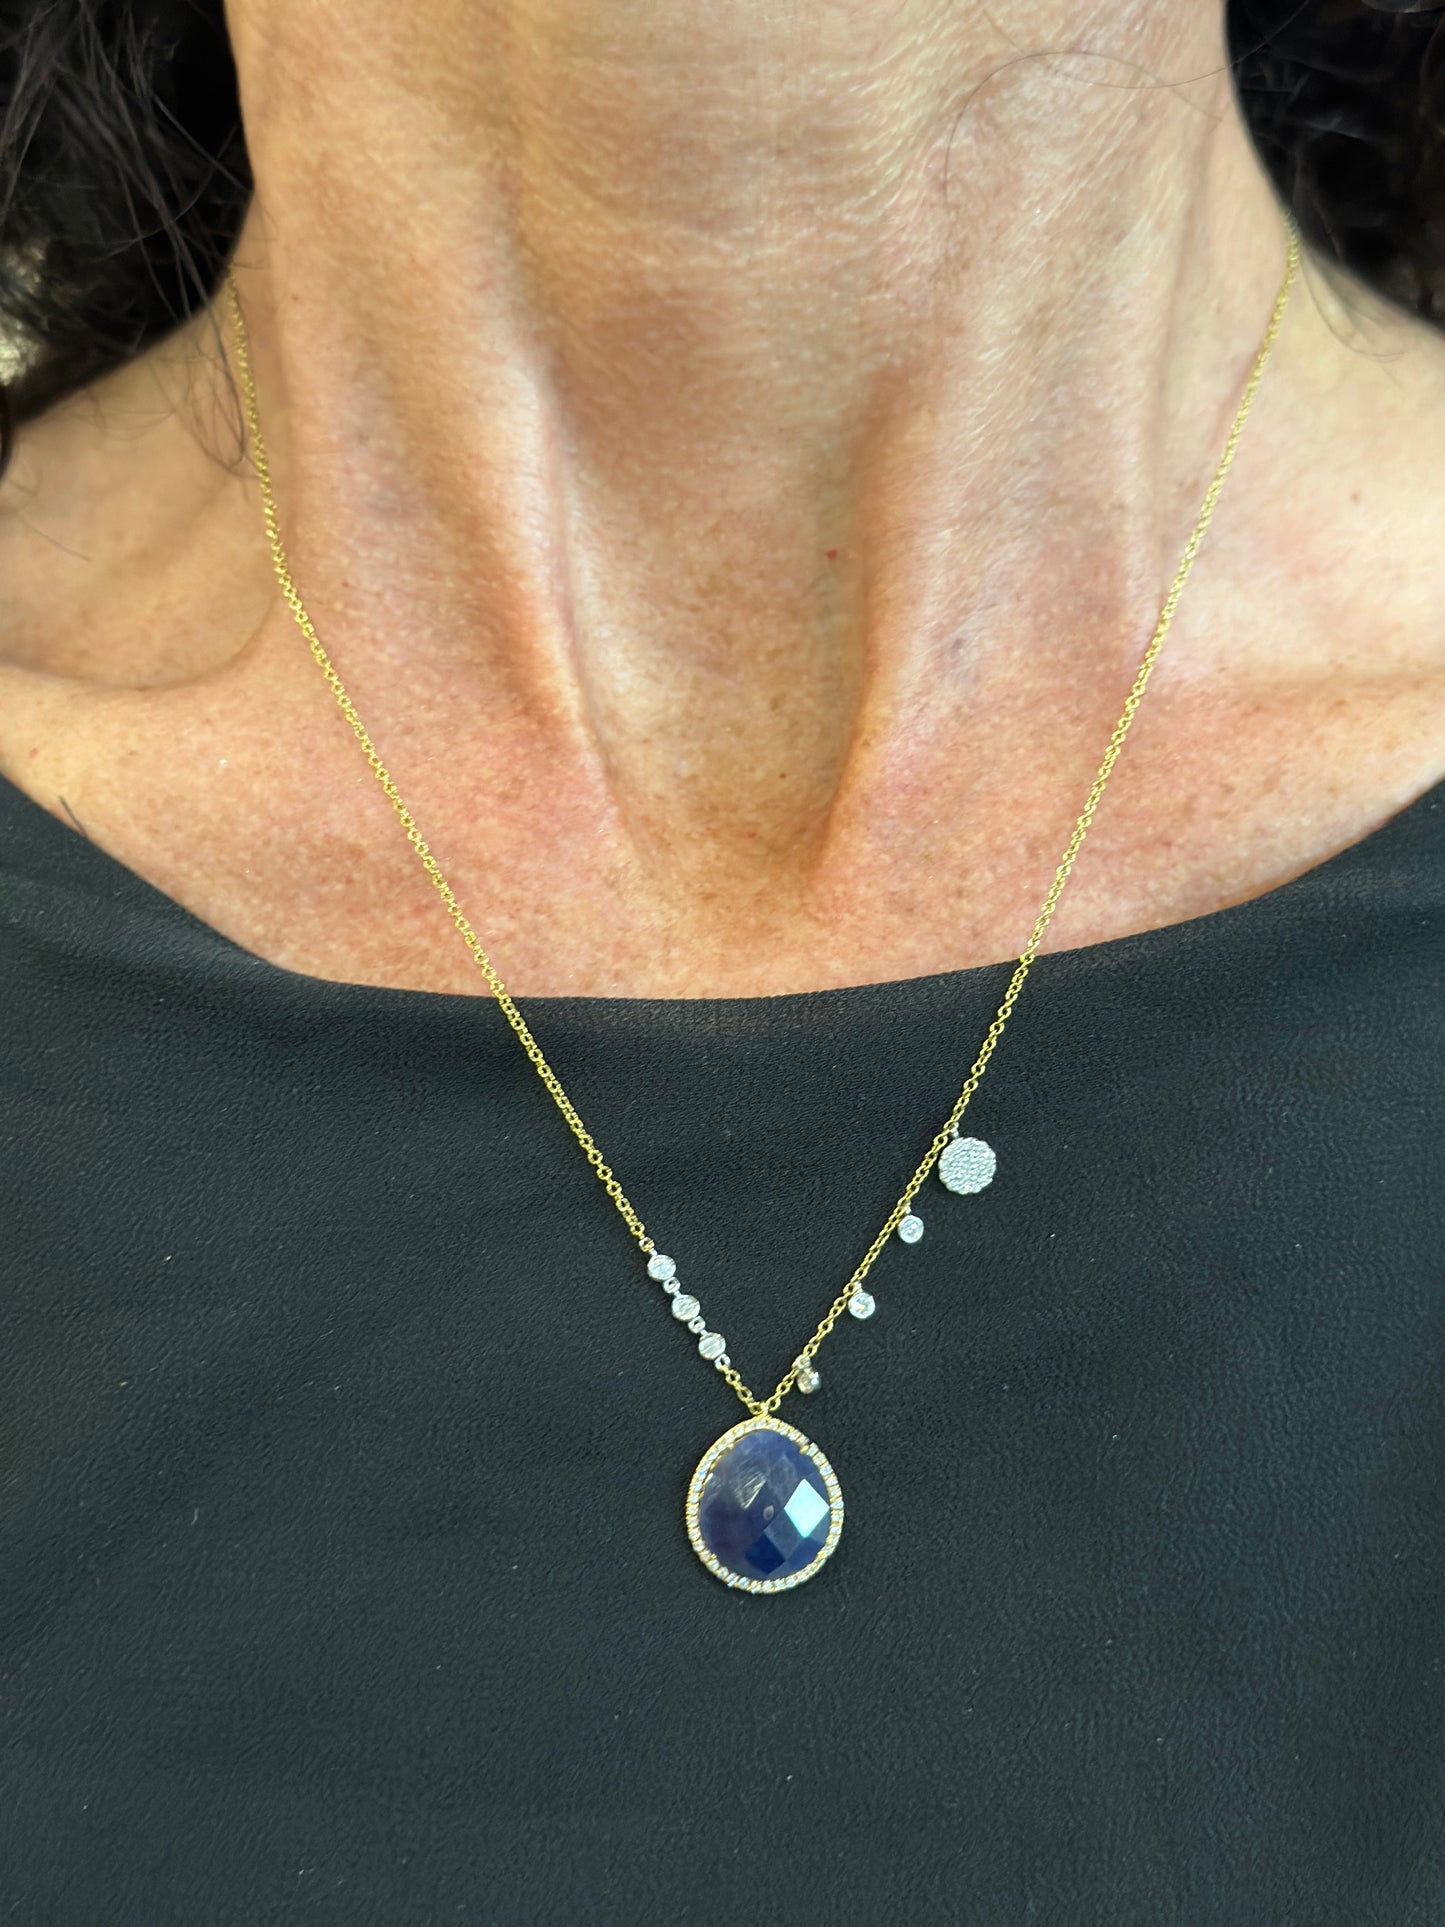 Meira T 14ky Sapphire Slice Necklace with Diamond Accents